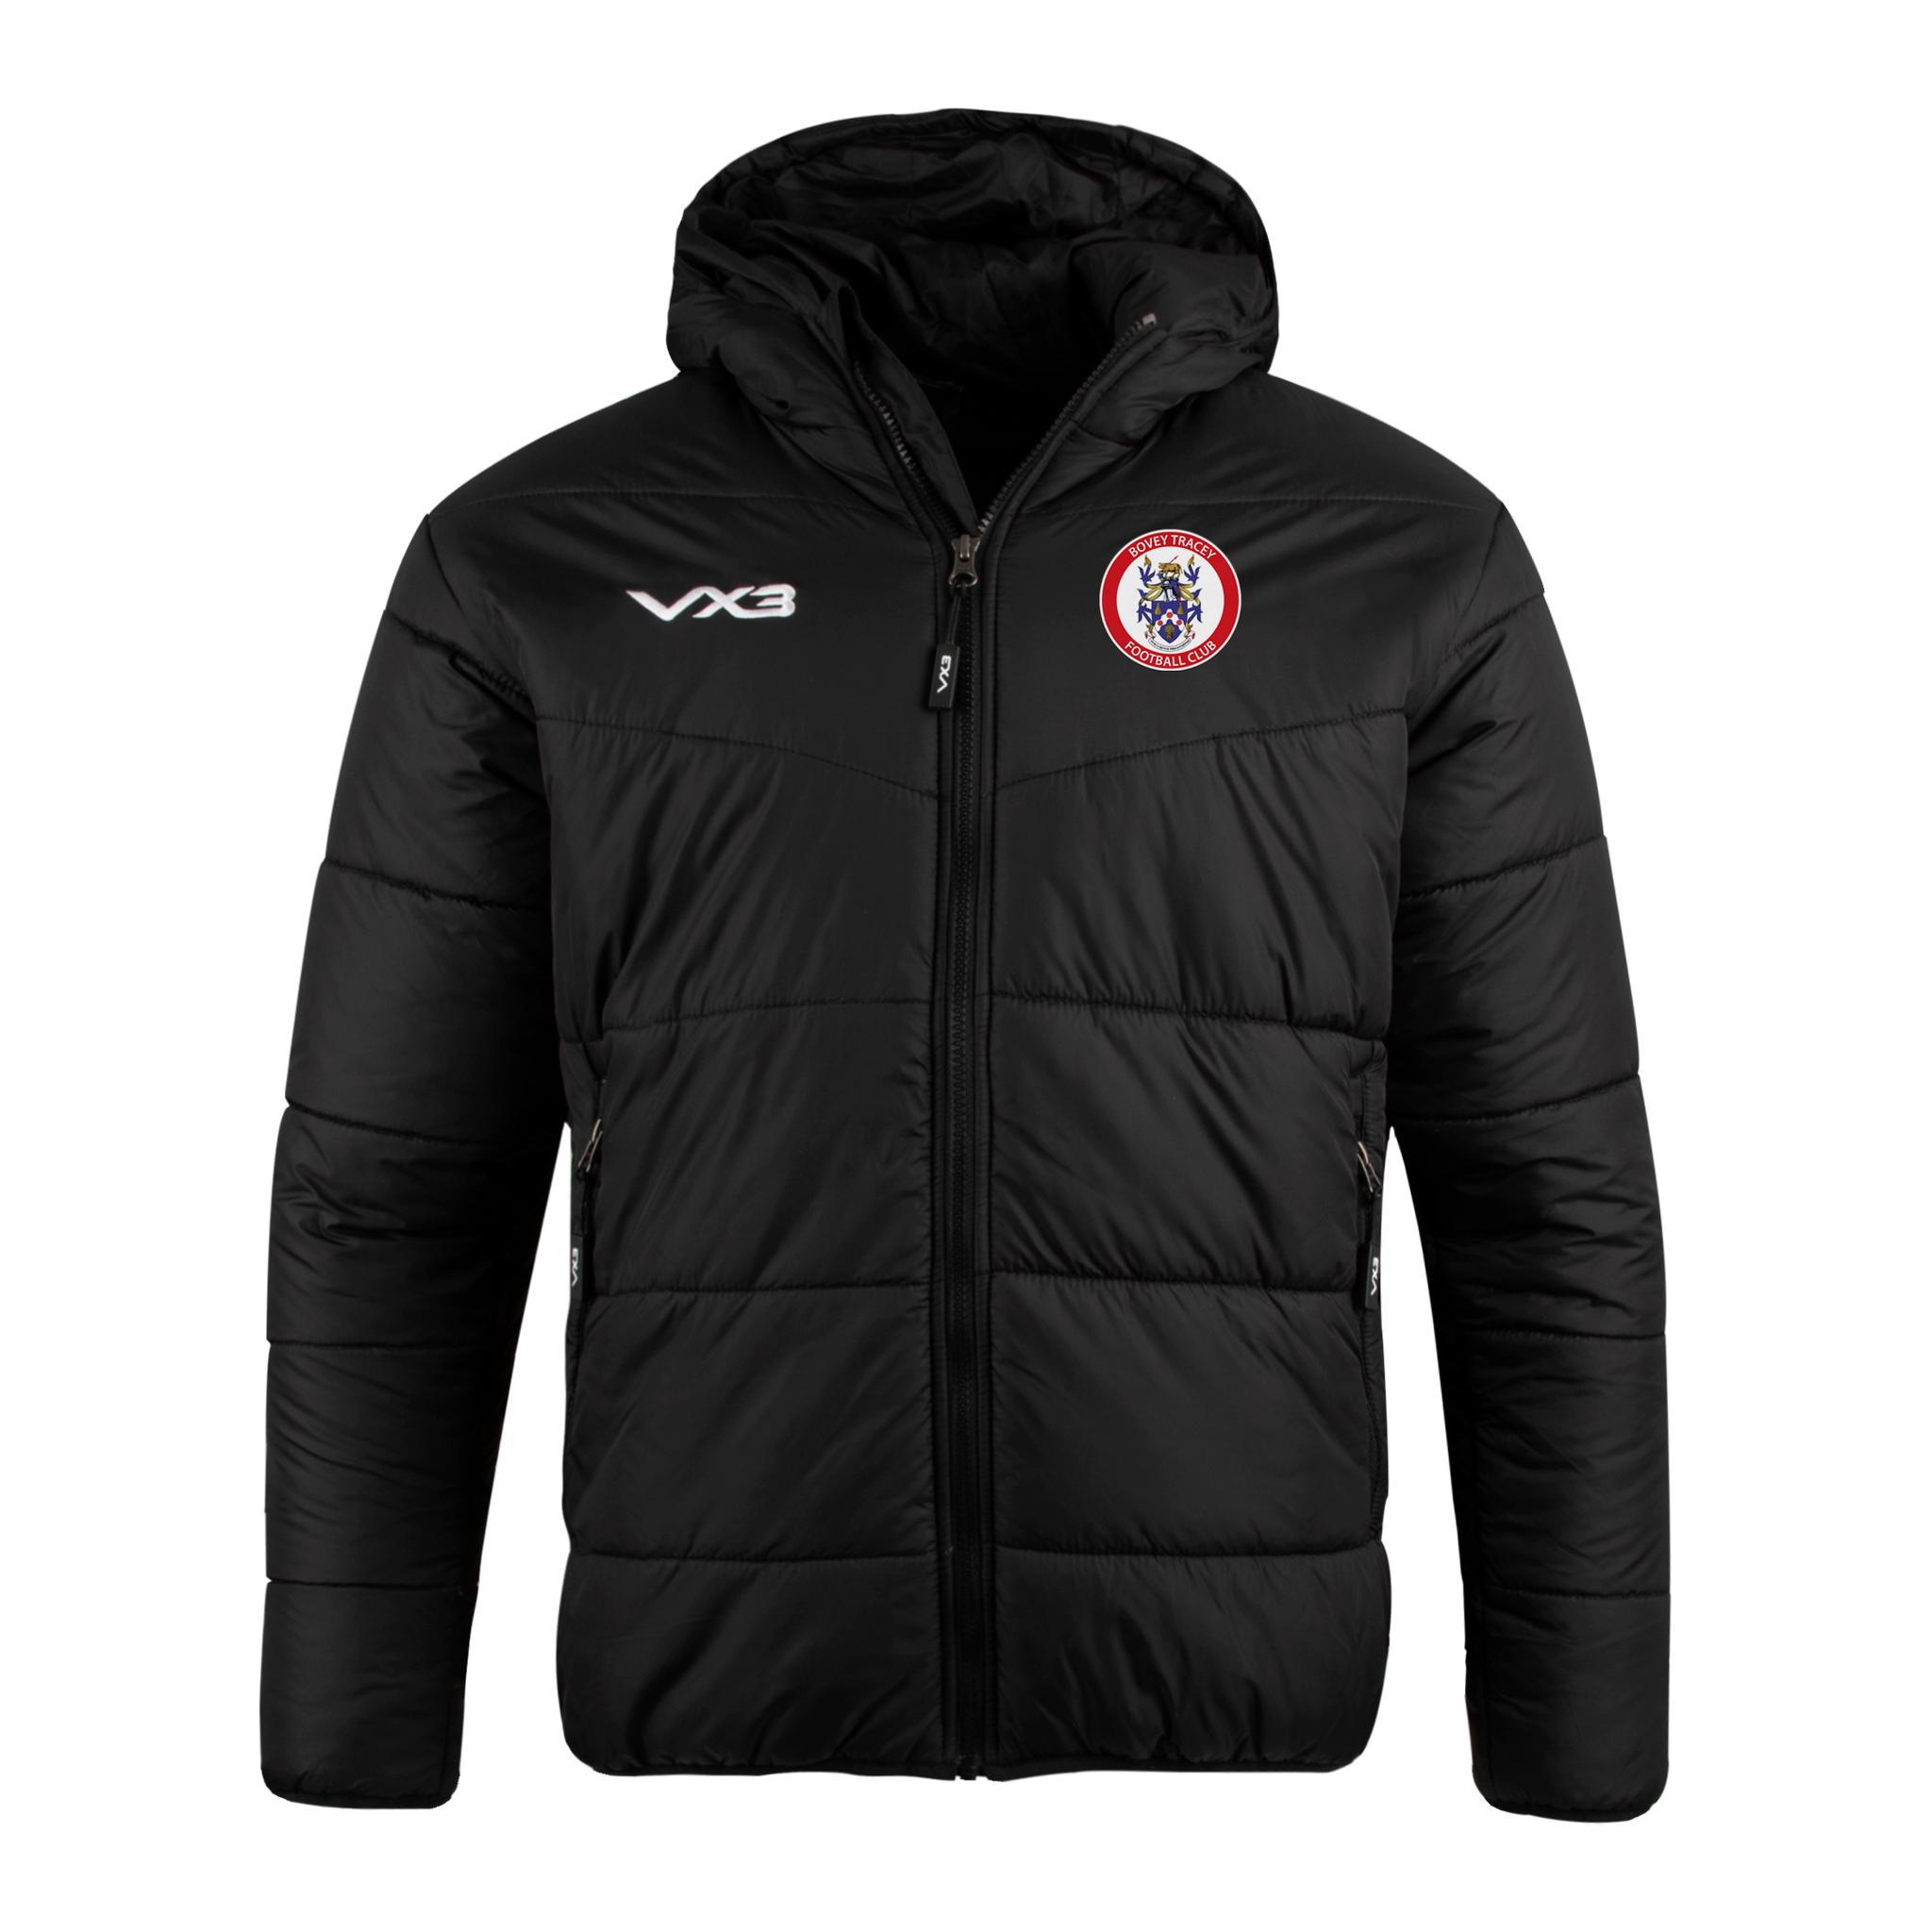 Bovey Tracey AFC Lorica Quilted Jacket Ladies